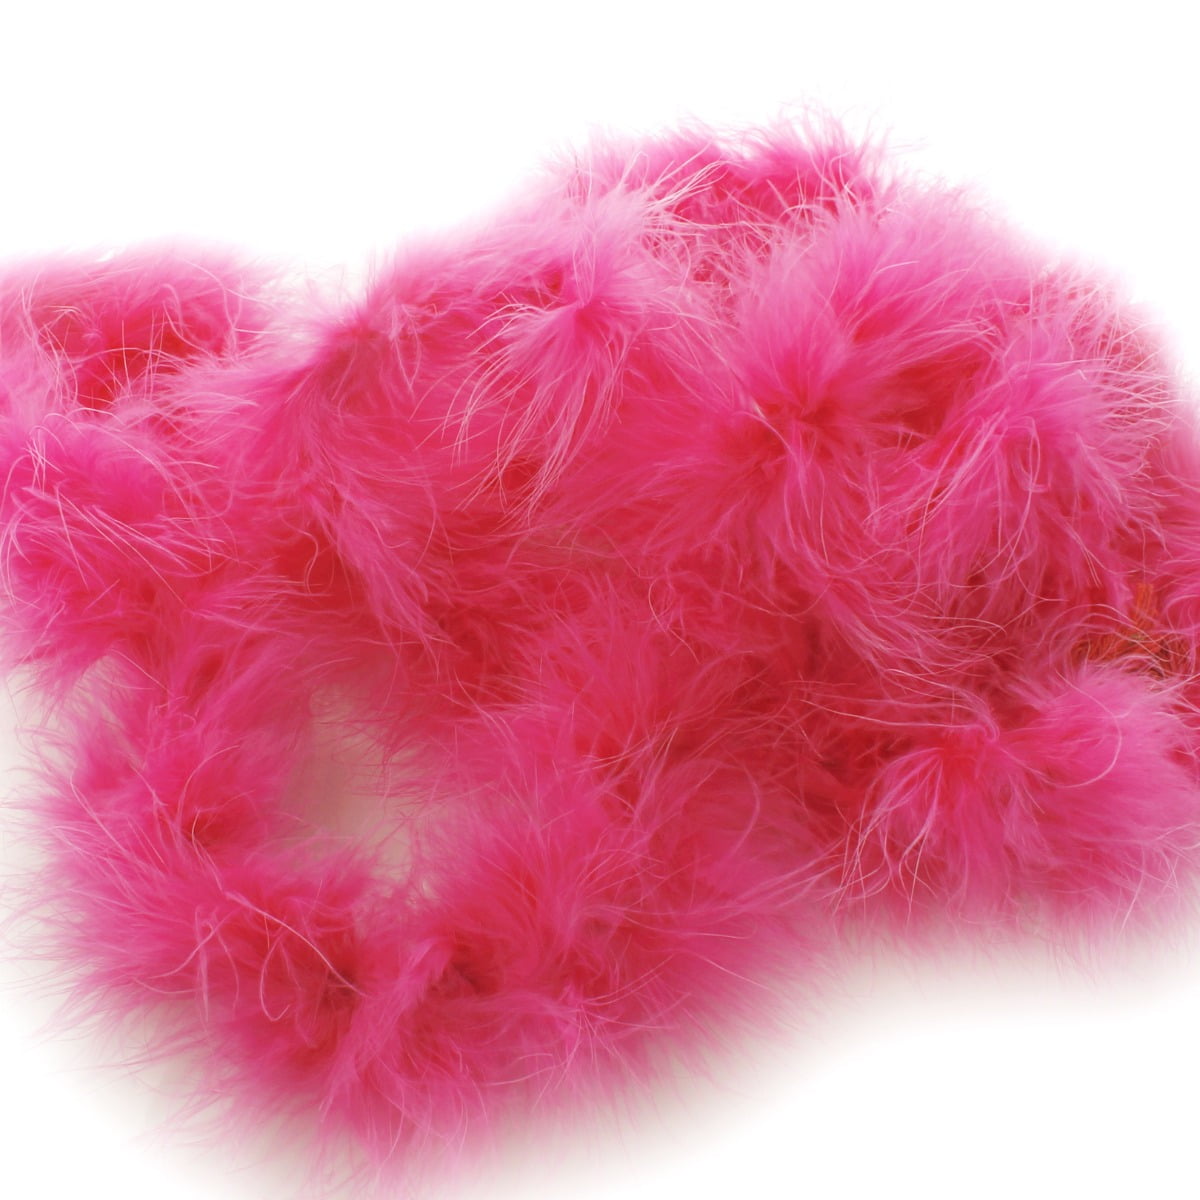 Hairbow Center Hot Pink All Occasion Full Marabou Feather Boa, 72 